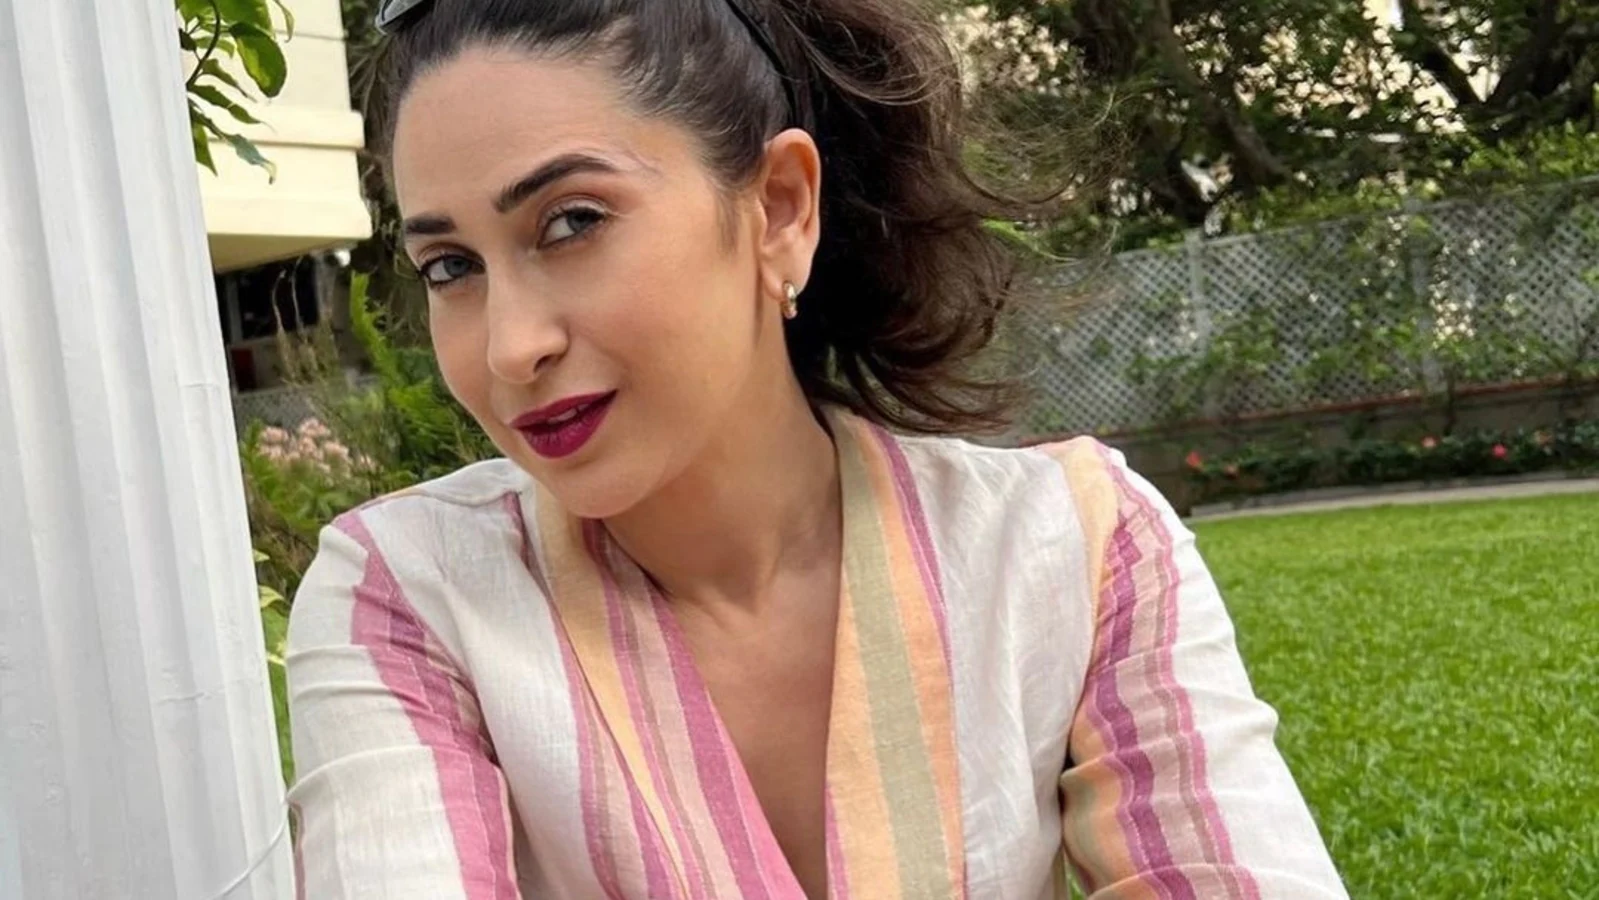 Karisma Kapoor rekindles our crush with sultry summer vibes in ₹16k tunic set